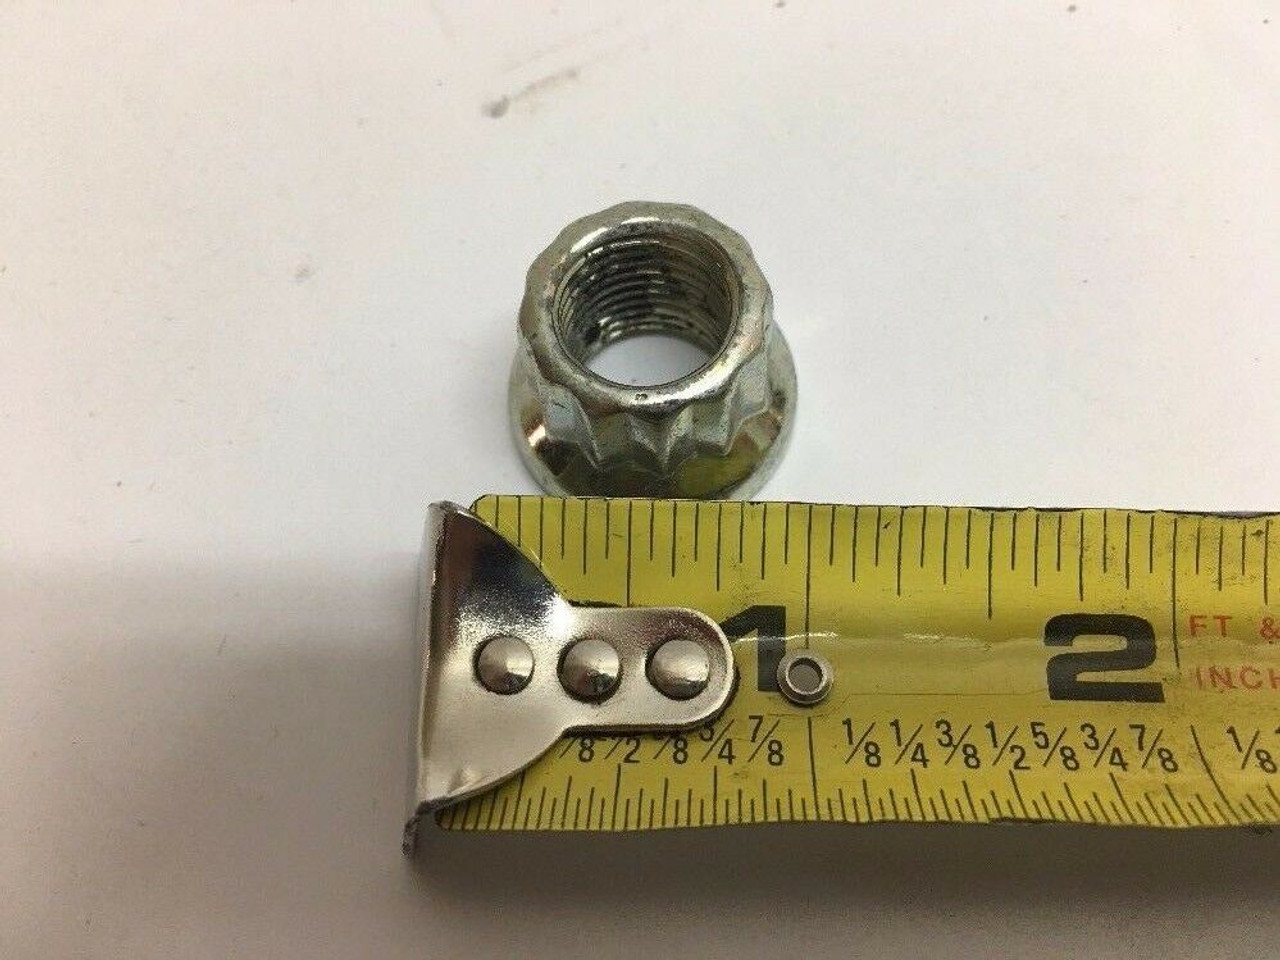 Extended Washer Self-Locking Nut 8756580 Steel Lot of 2